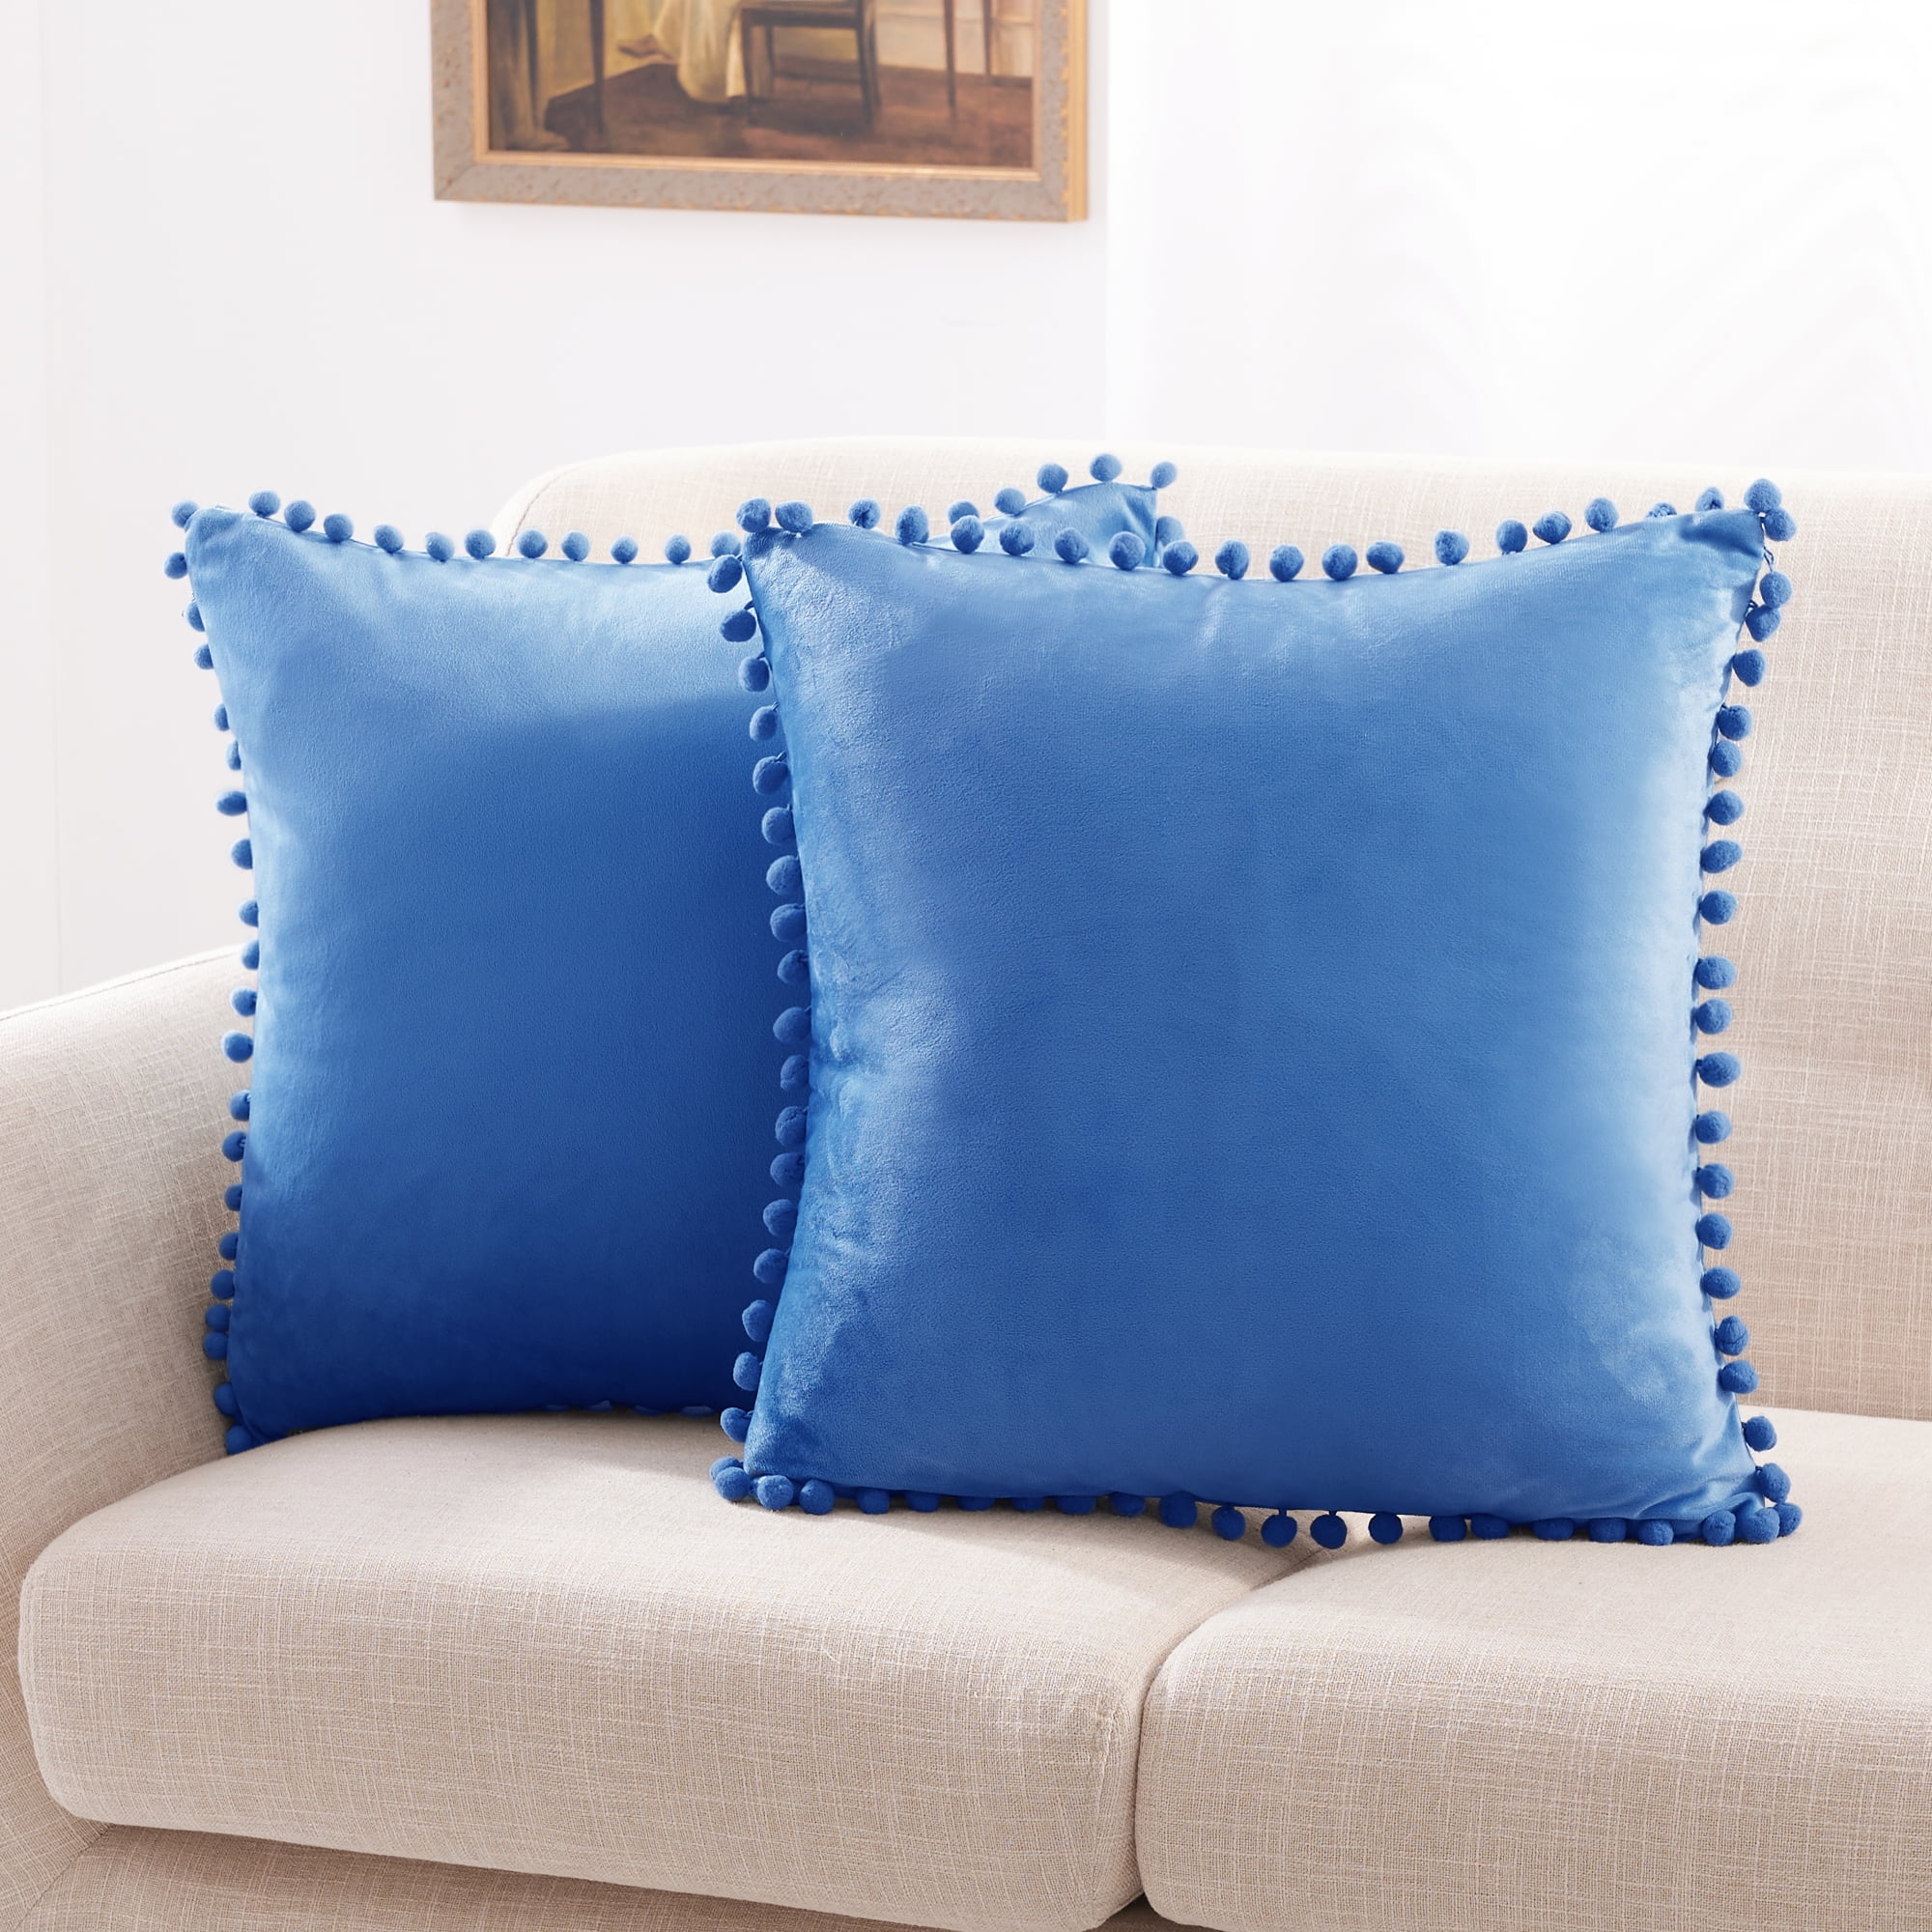 CLEARANCE Mix and Match Throw Pillow Covers, 16x16 Zippered Pillow Sham,  Cheap Blue Pillow Cases for Your Bedroom on SALE 